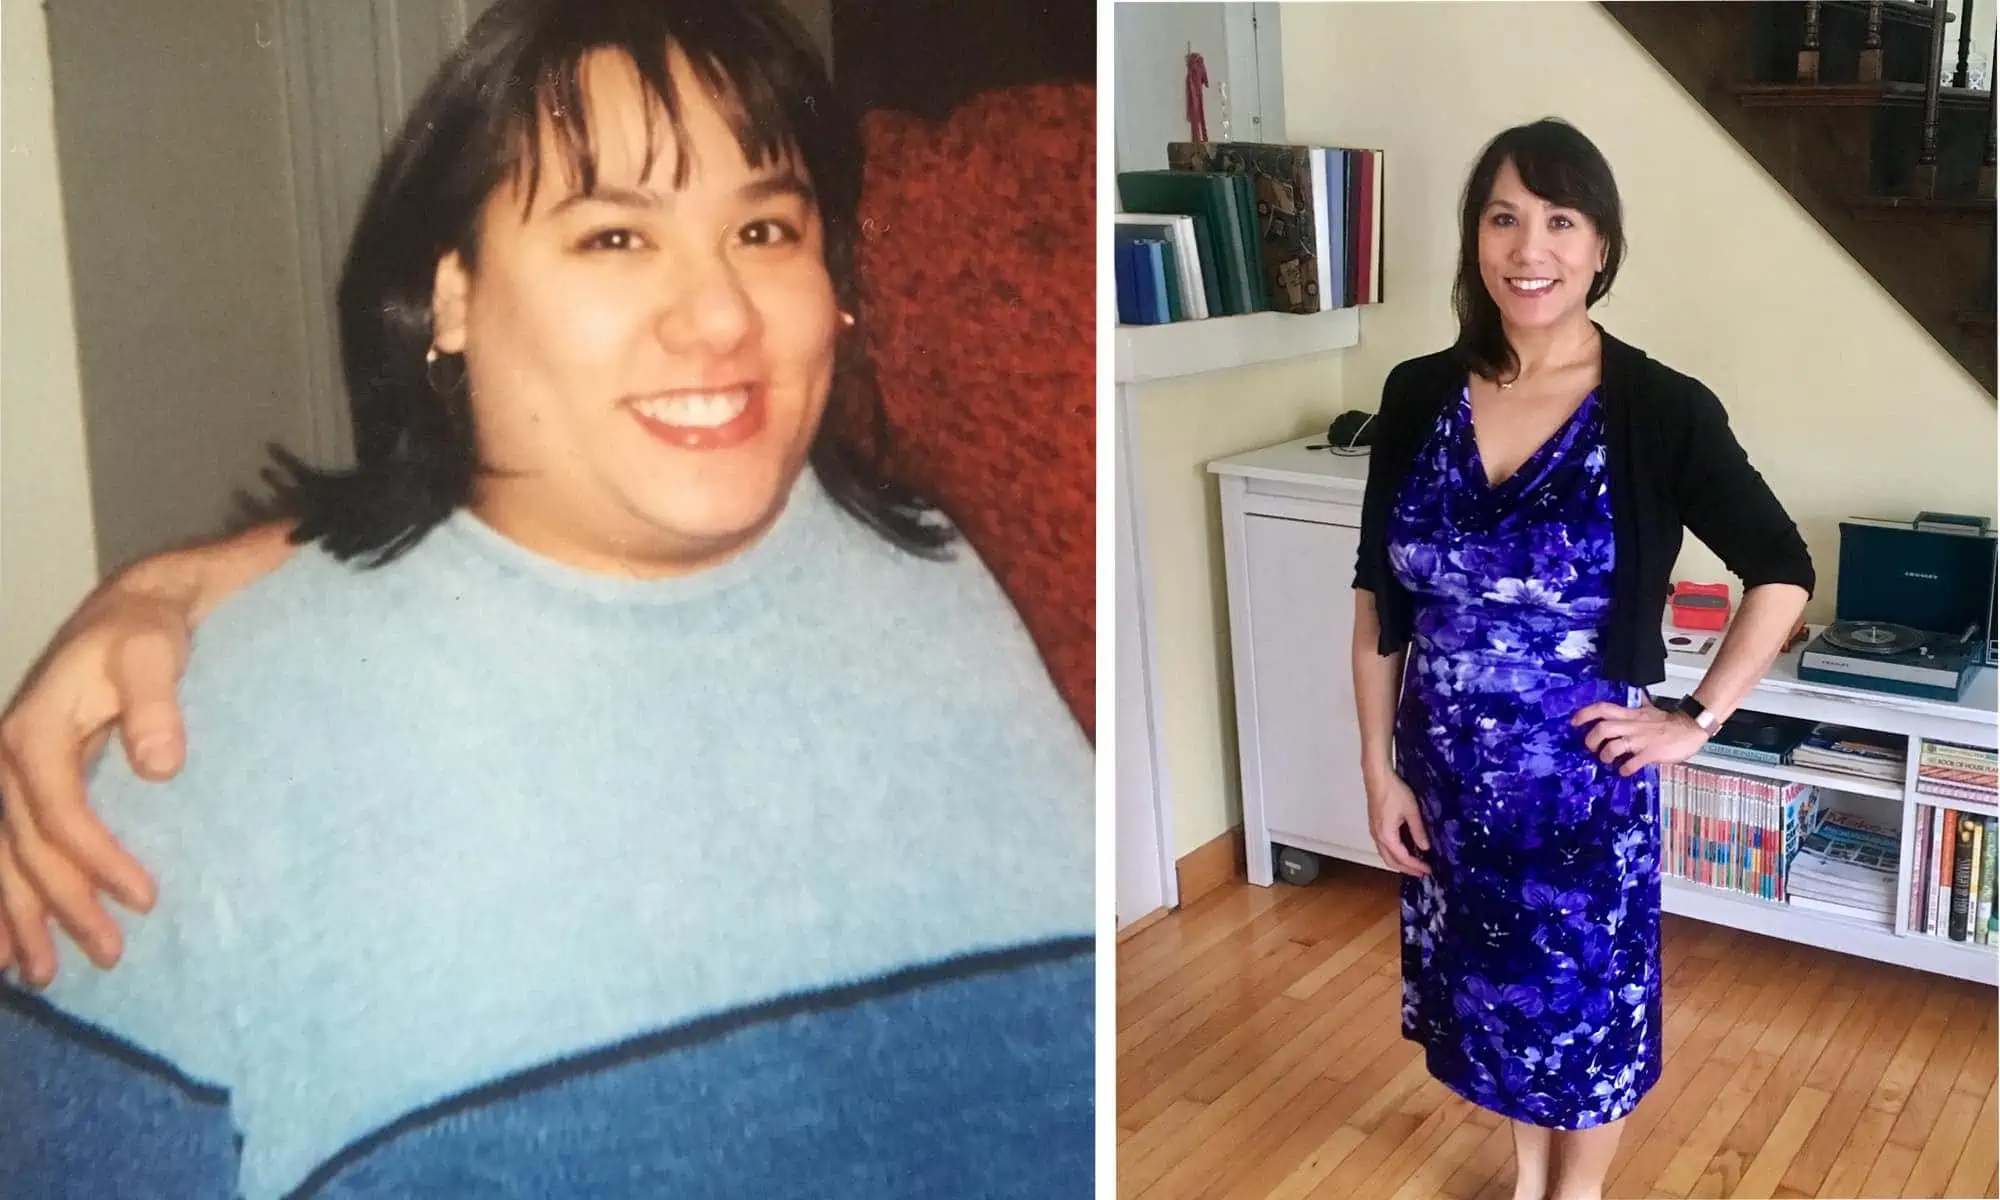 Gina House 100 Pounds Weight Loss Before and After Photos Eating Plant Based Unprocessed Vegan